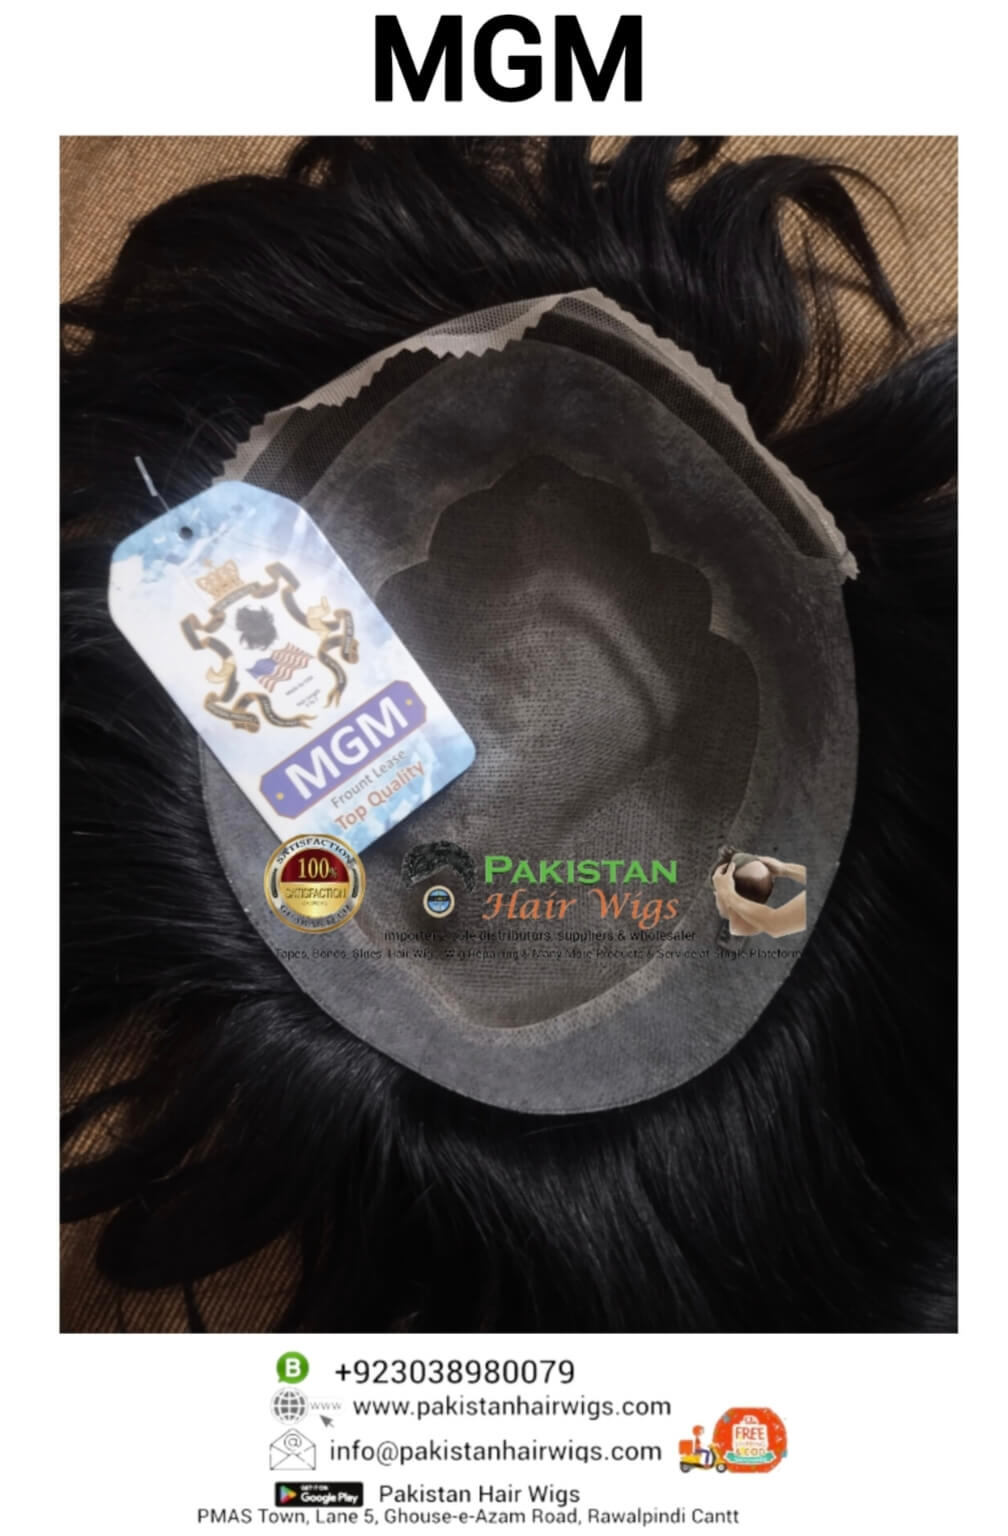 MGM Hair Unit, MGM Front Lace Hair Patch, MGM Hair Patch, MGM Hair Wig, MGM Hair Toupee, MGM Front Lace, 1